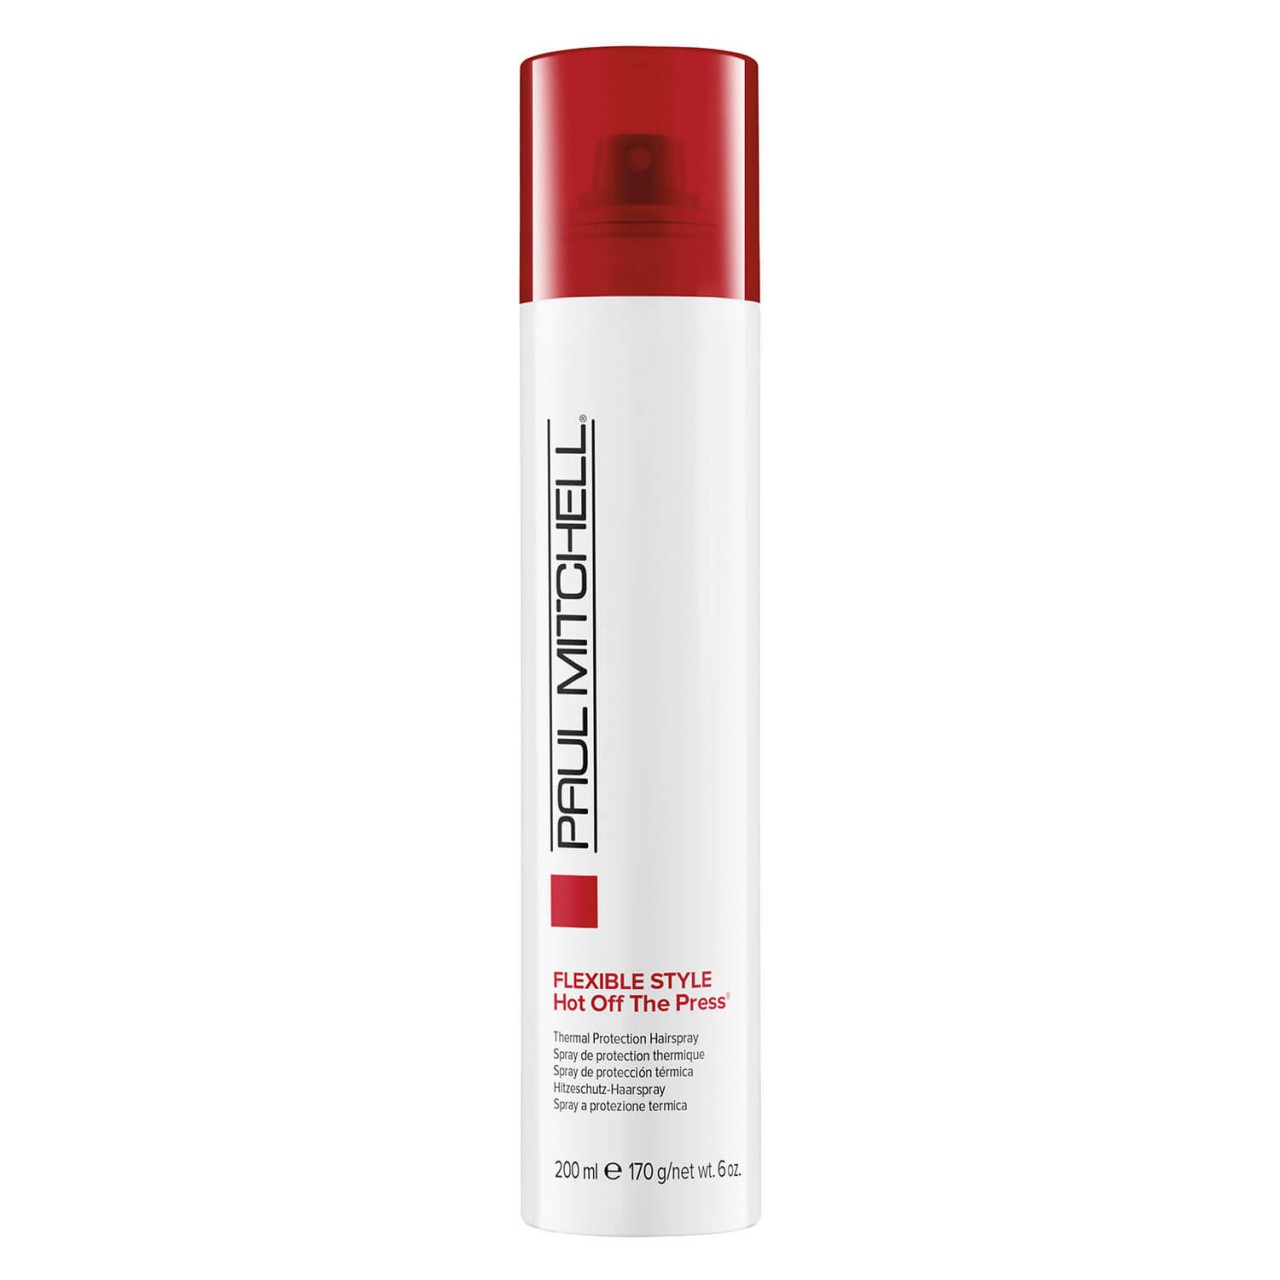 Flexible Style - Hot Off The Press von Paul Mitchell